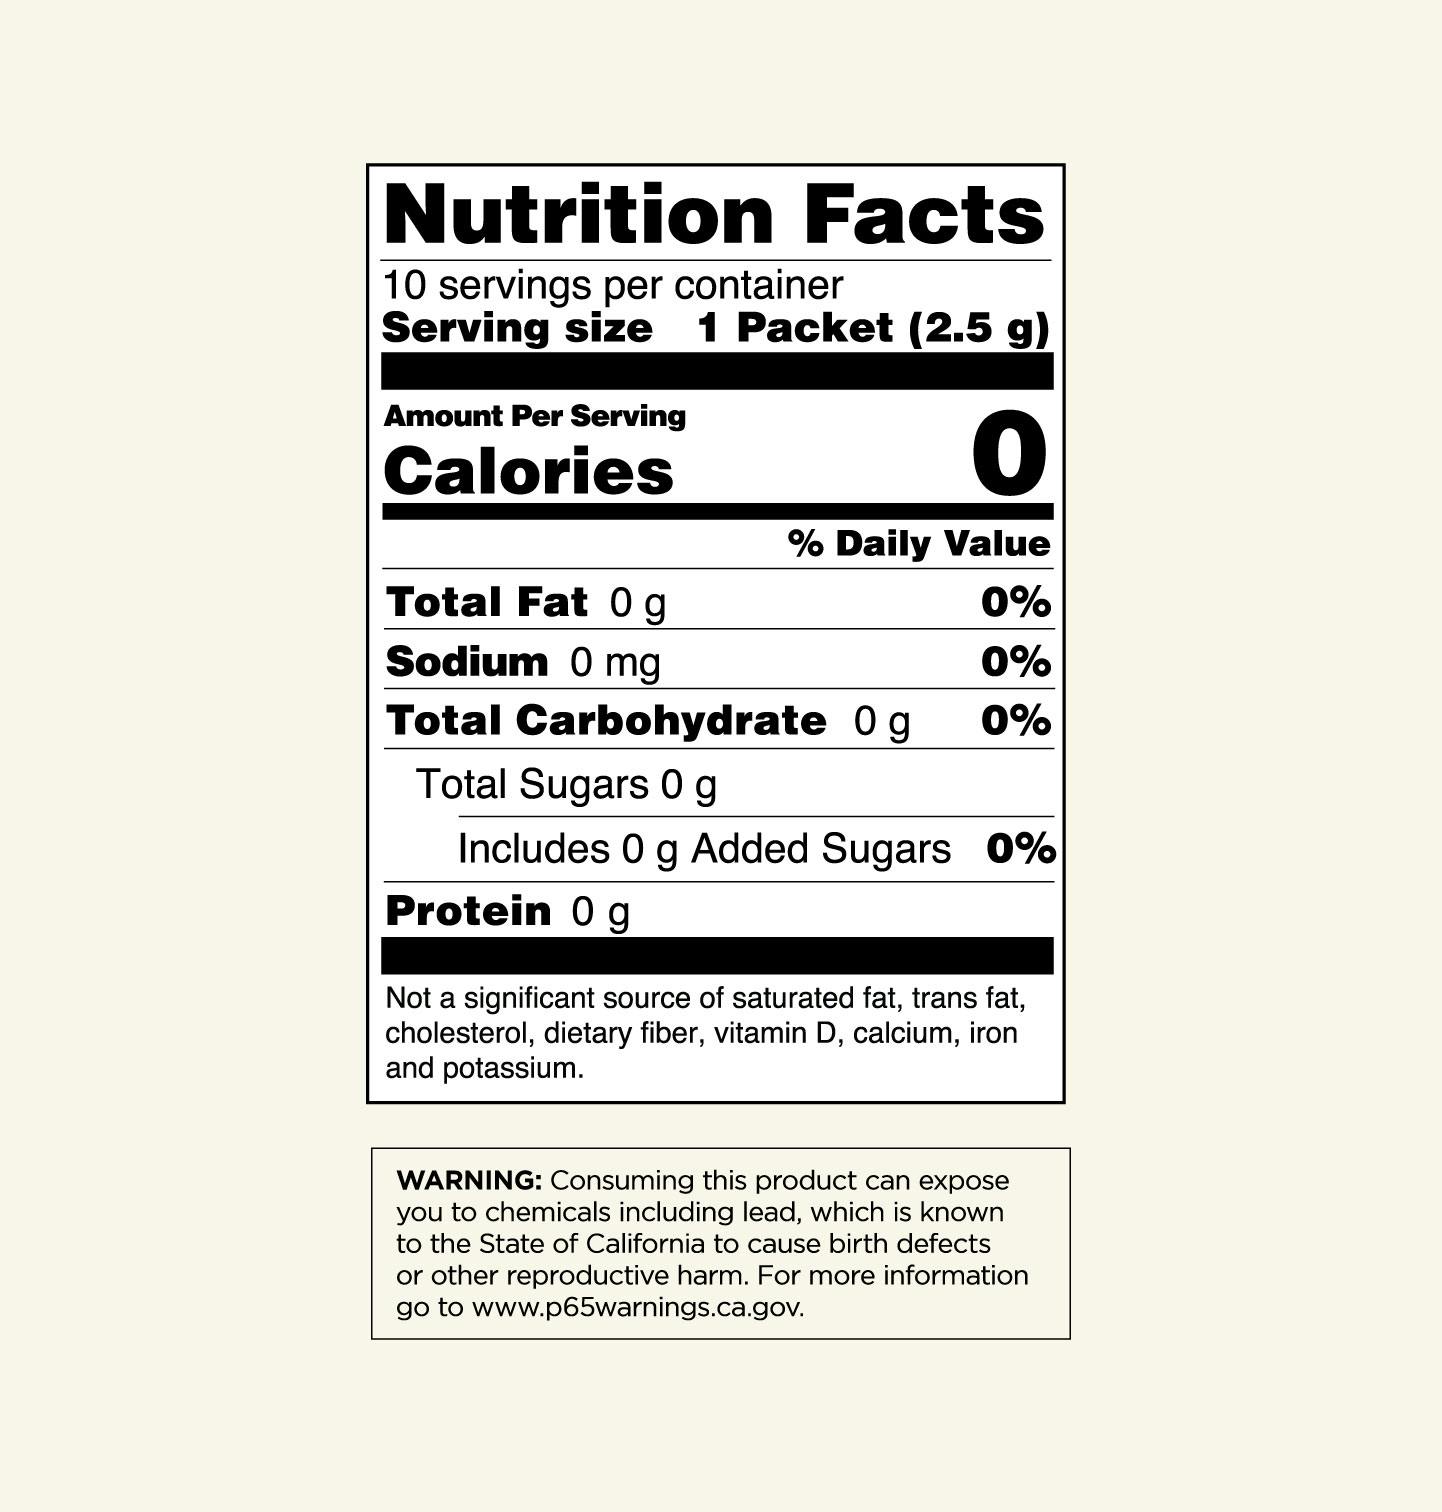 Panel Nutrition Facts